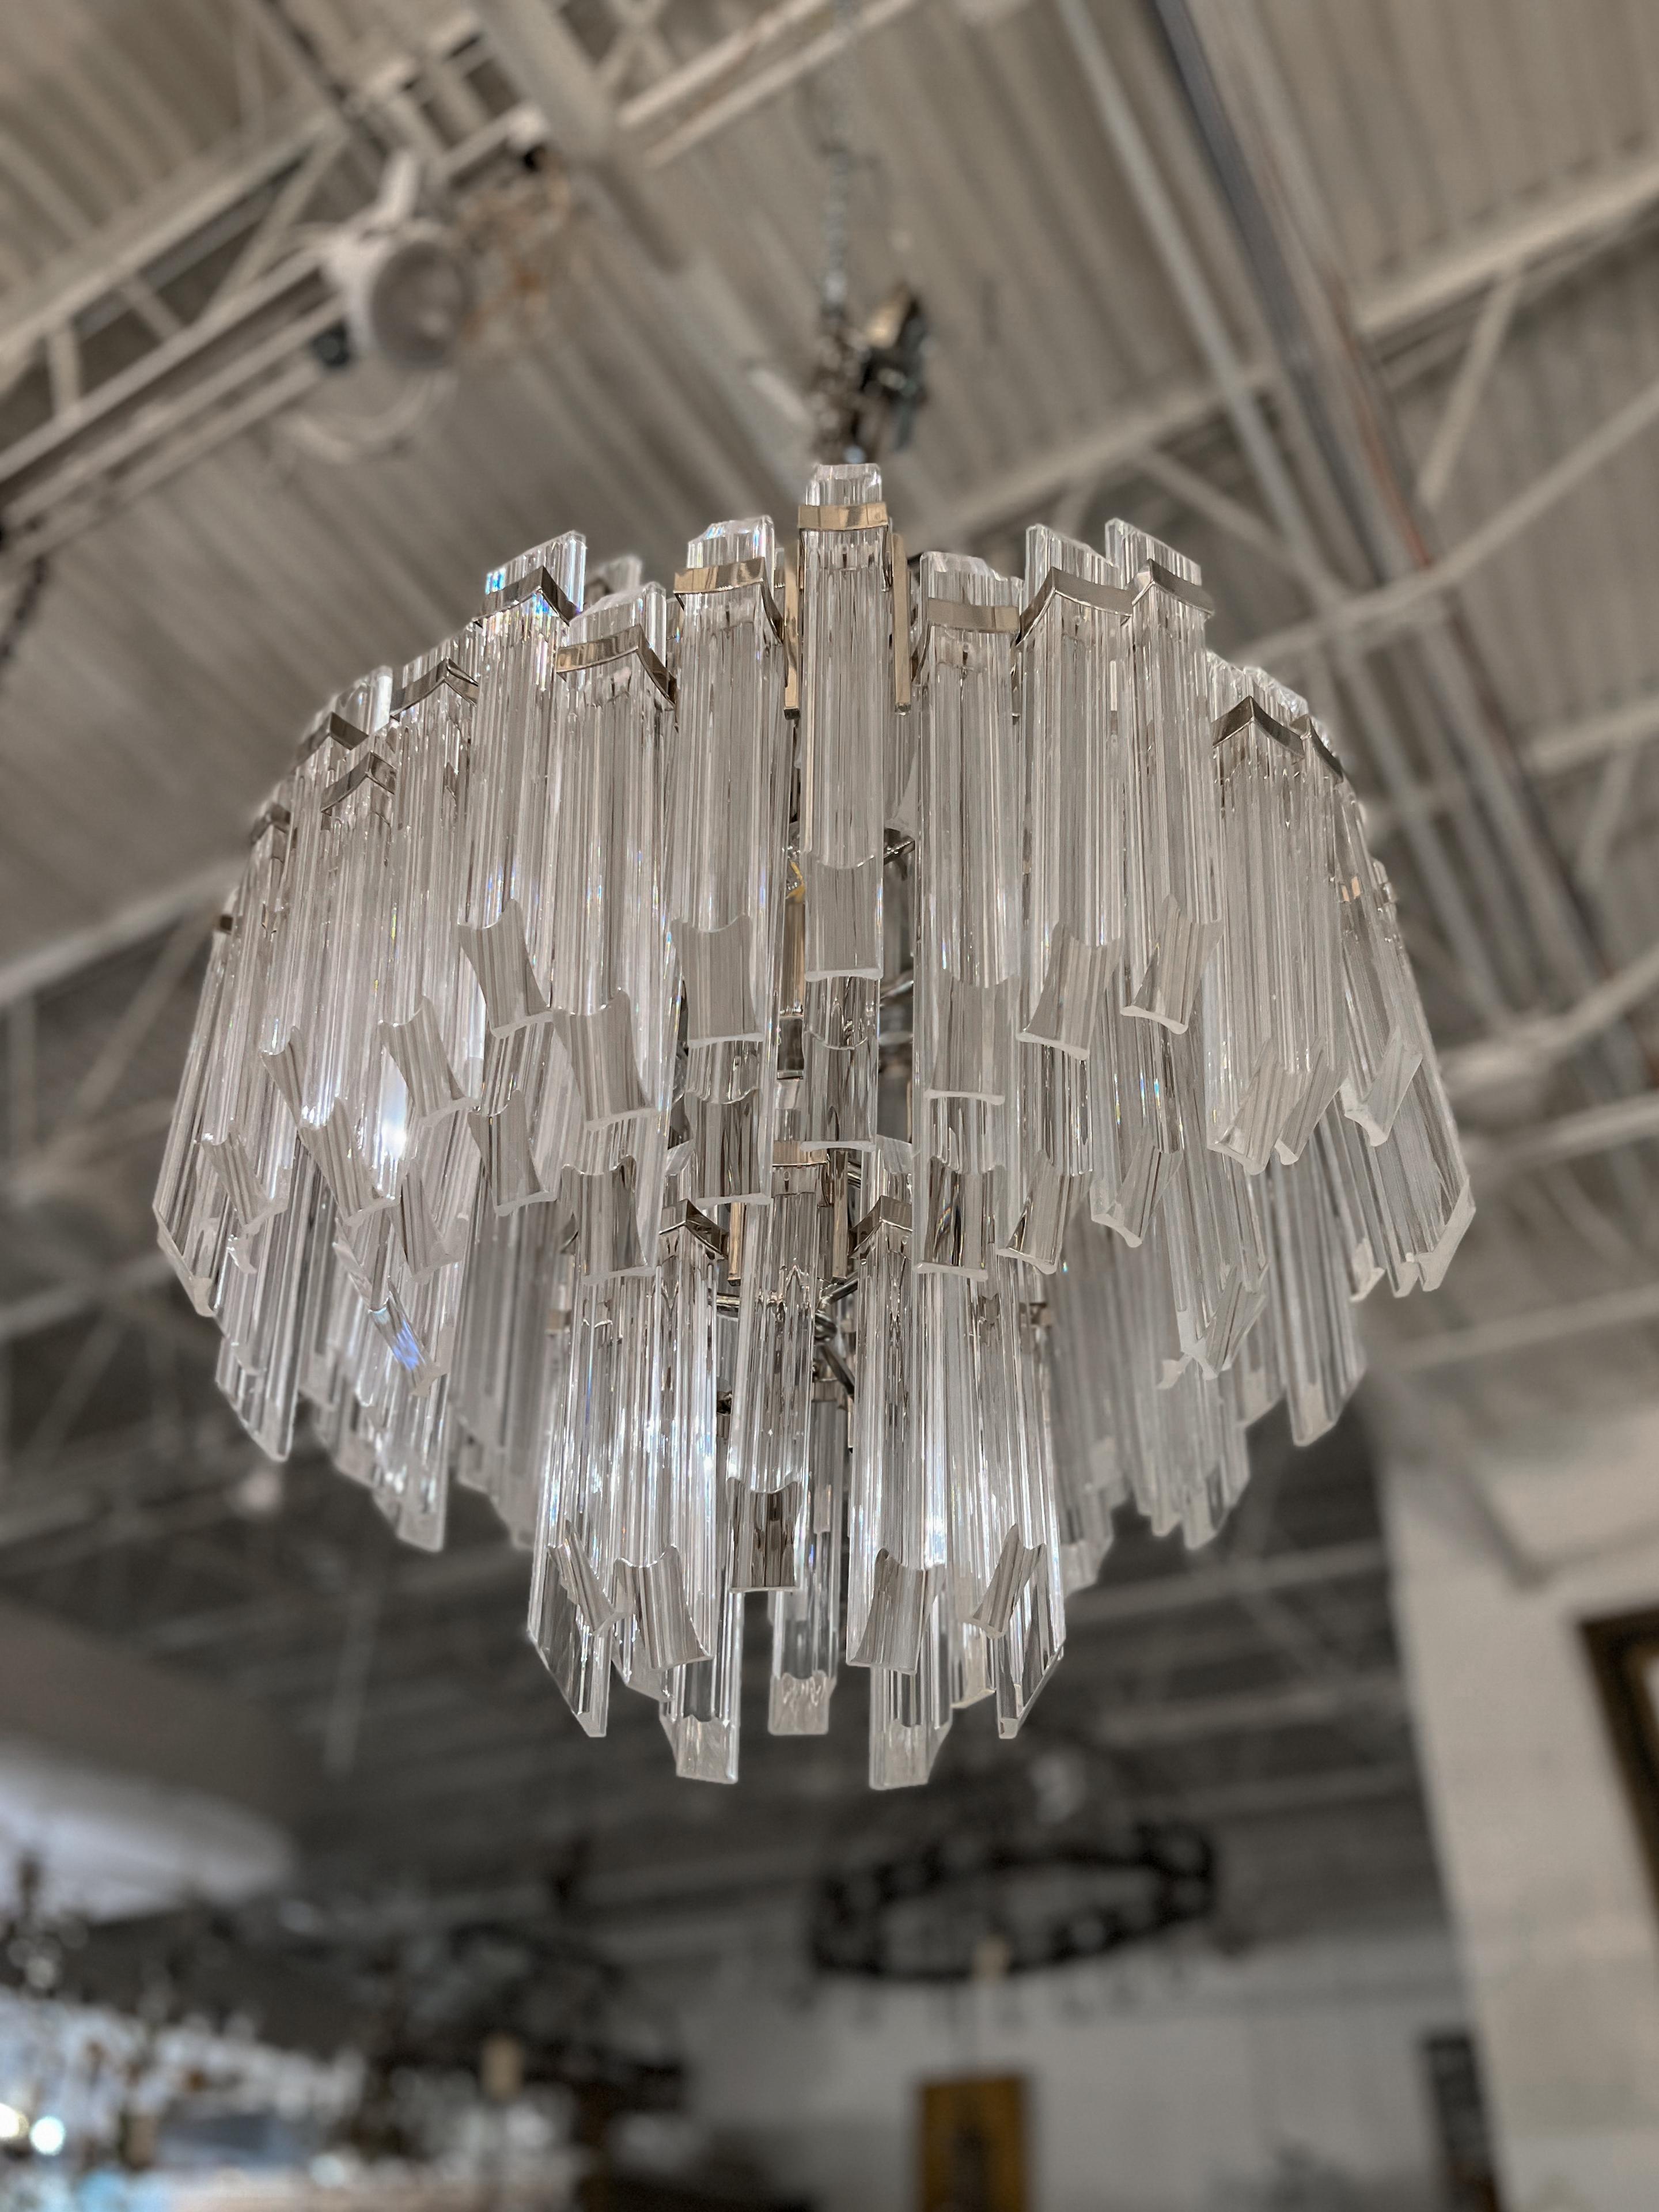 The Adele four tier waterfall chandelier by Suzanne Kasler harps back to the beautiful Art Deco era where glamour and detail was king. This piece is absolutely stunning and remains in excellent condition. The wiring remains in tact and will